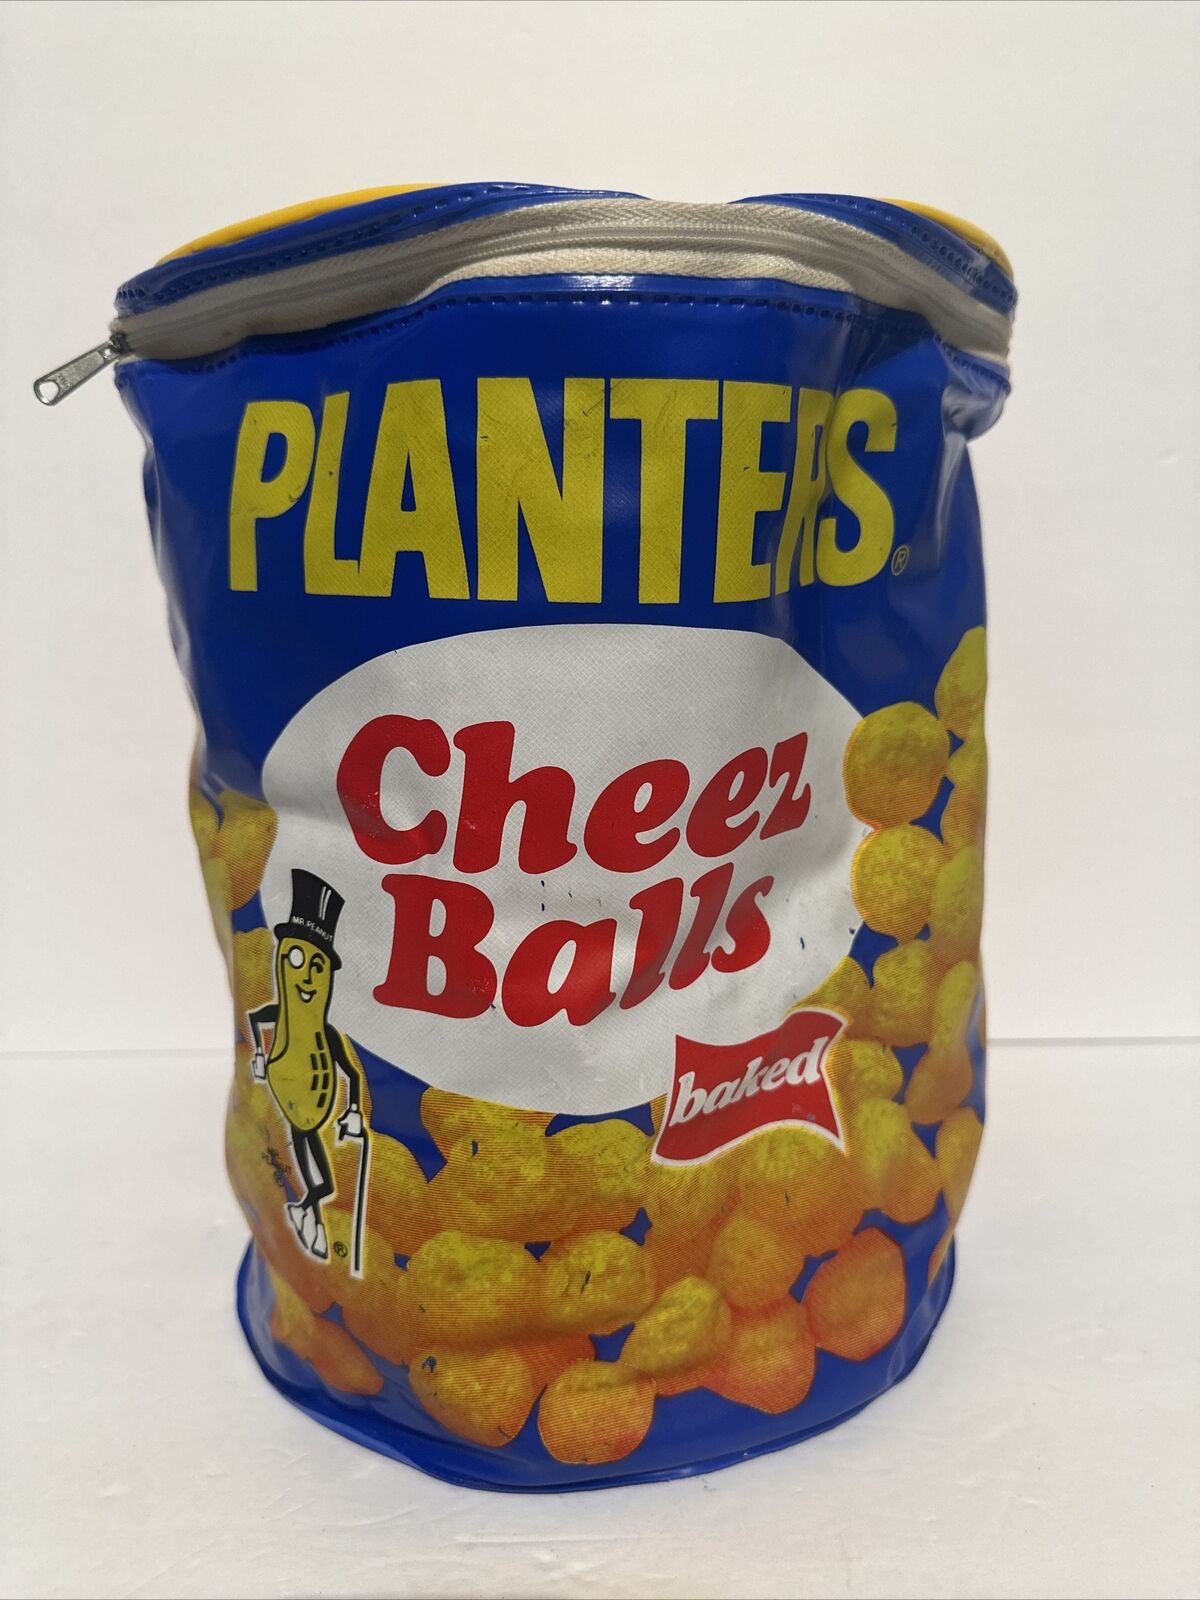 Vintage 1980’s  Planters Peanut Cheez Balls Baked  Insulated Cooler Bag